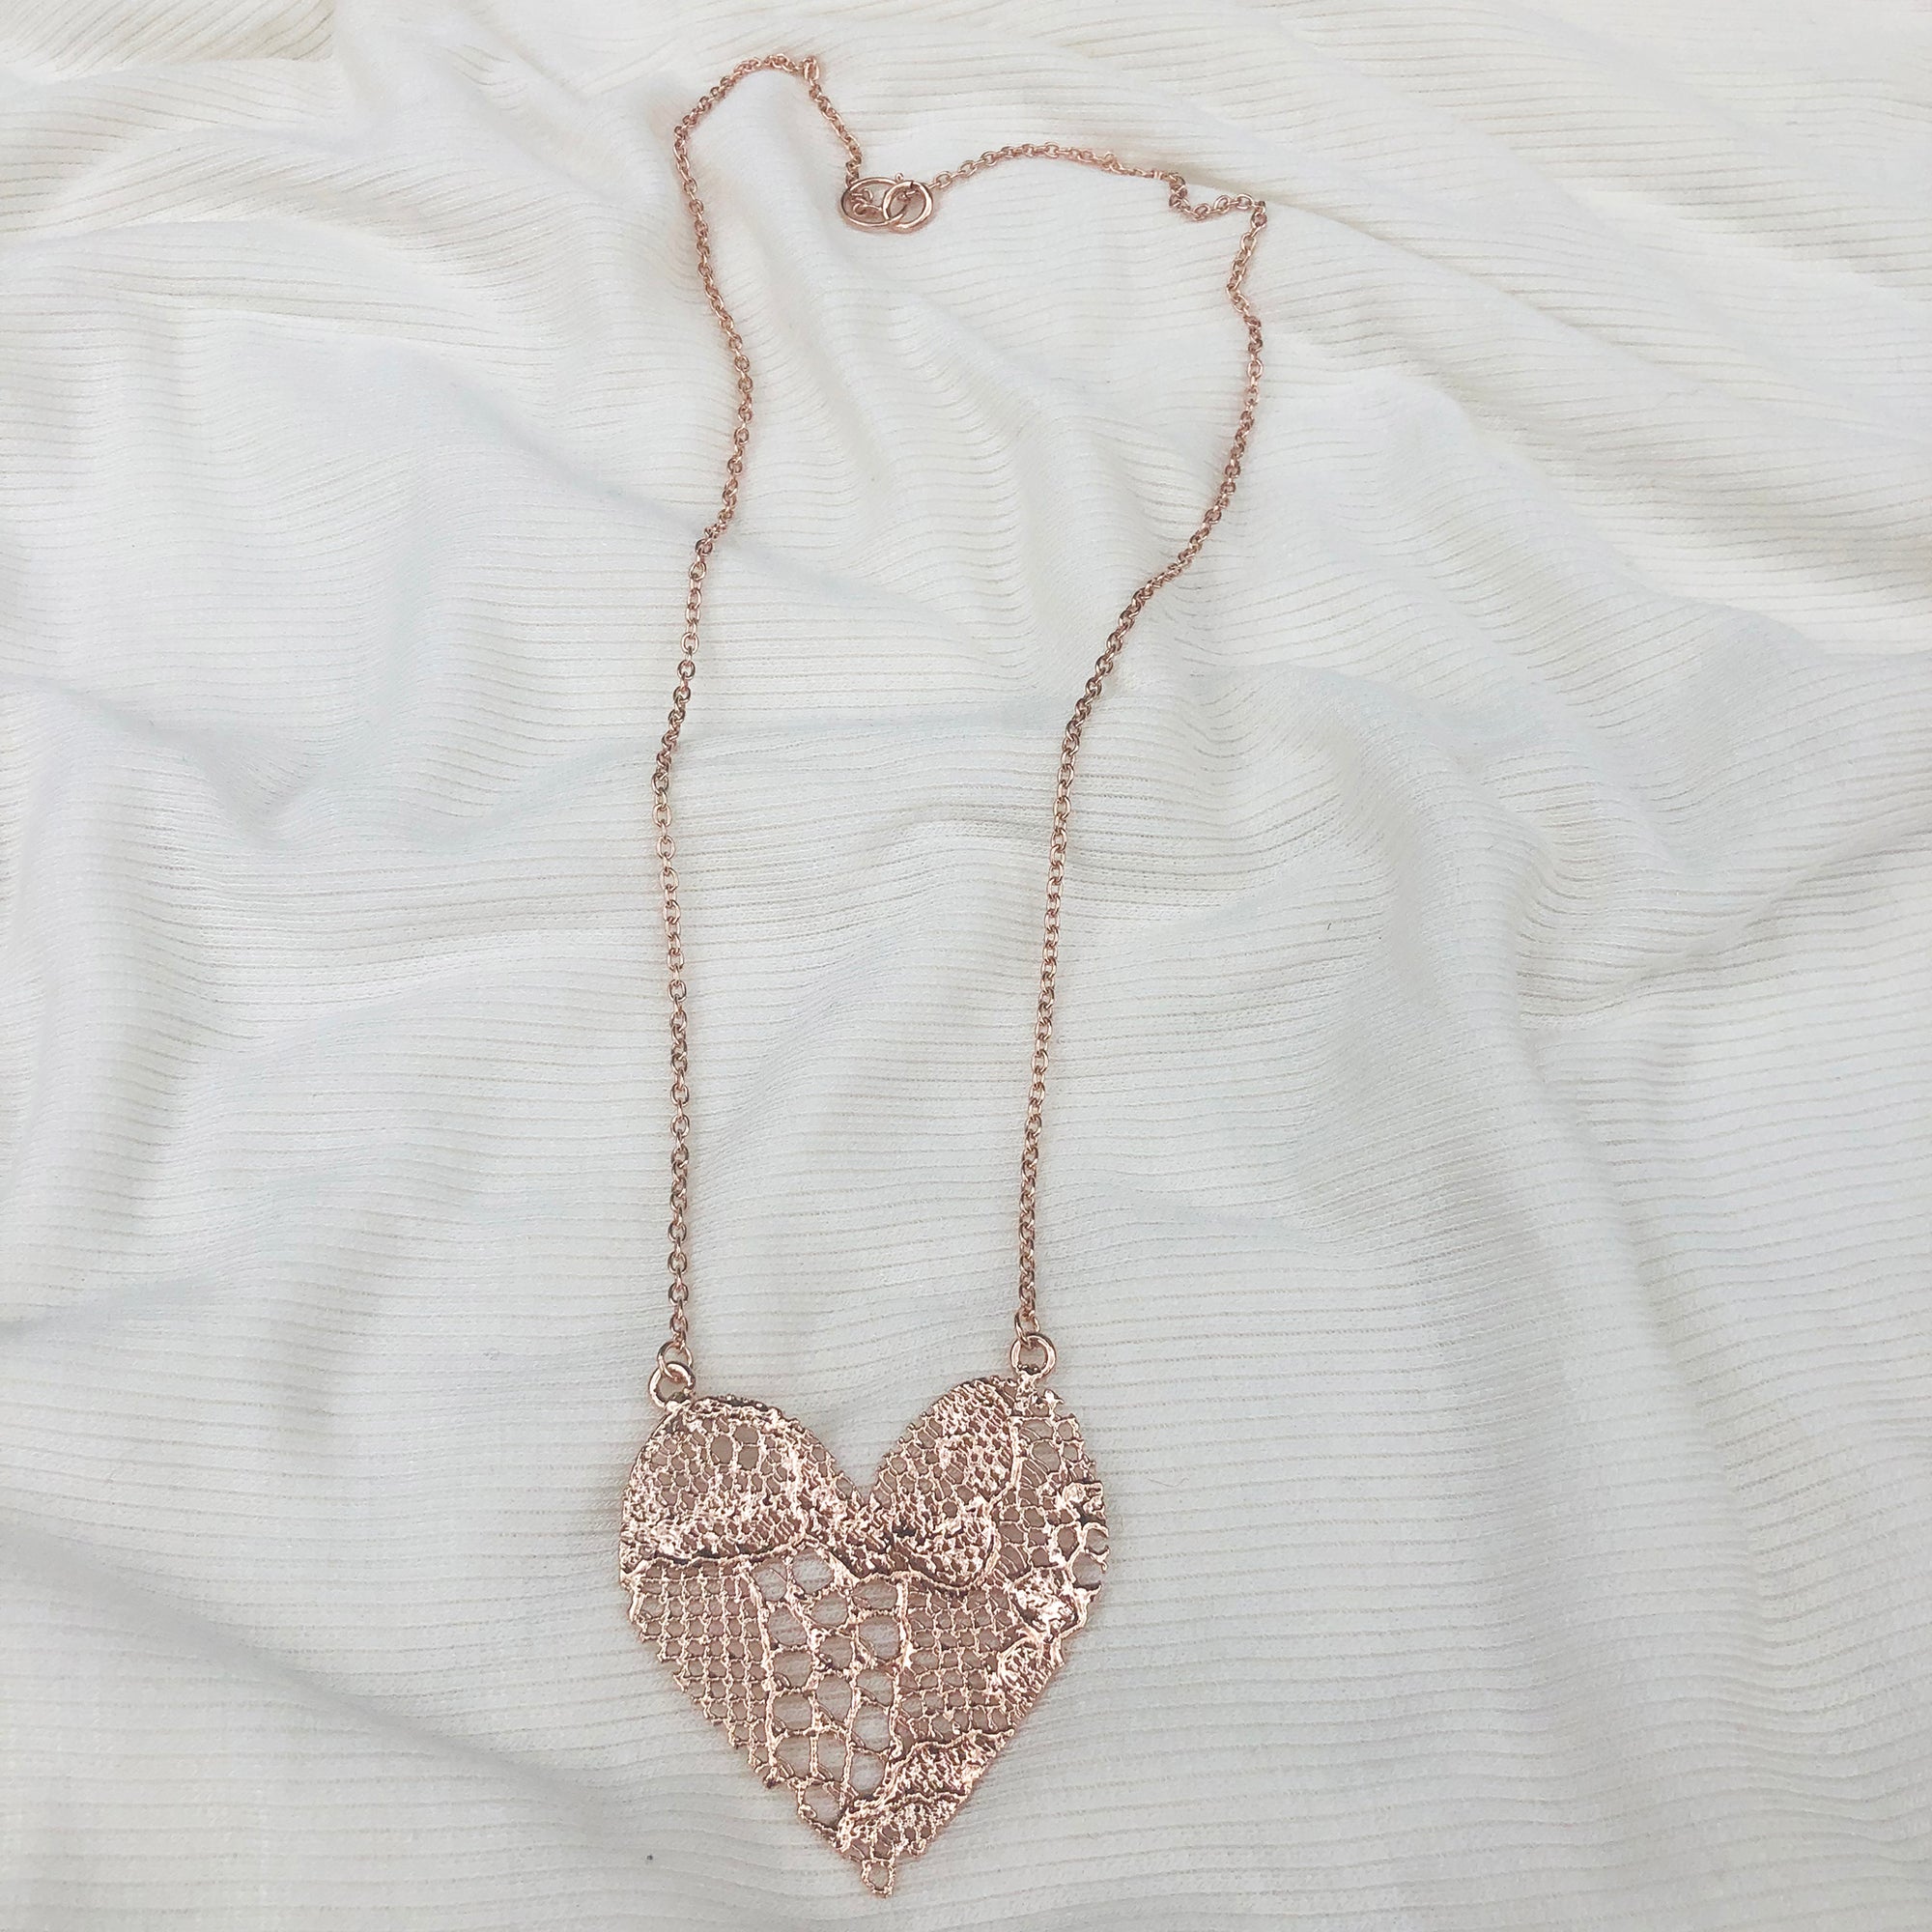 Lace Heart Necklace. 13th anniversary gift with a WOW factor. Made from European Chantilly lace dipped in rose gold.